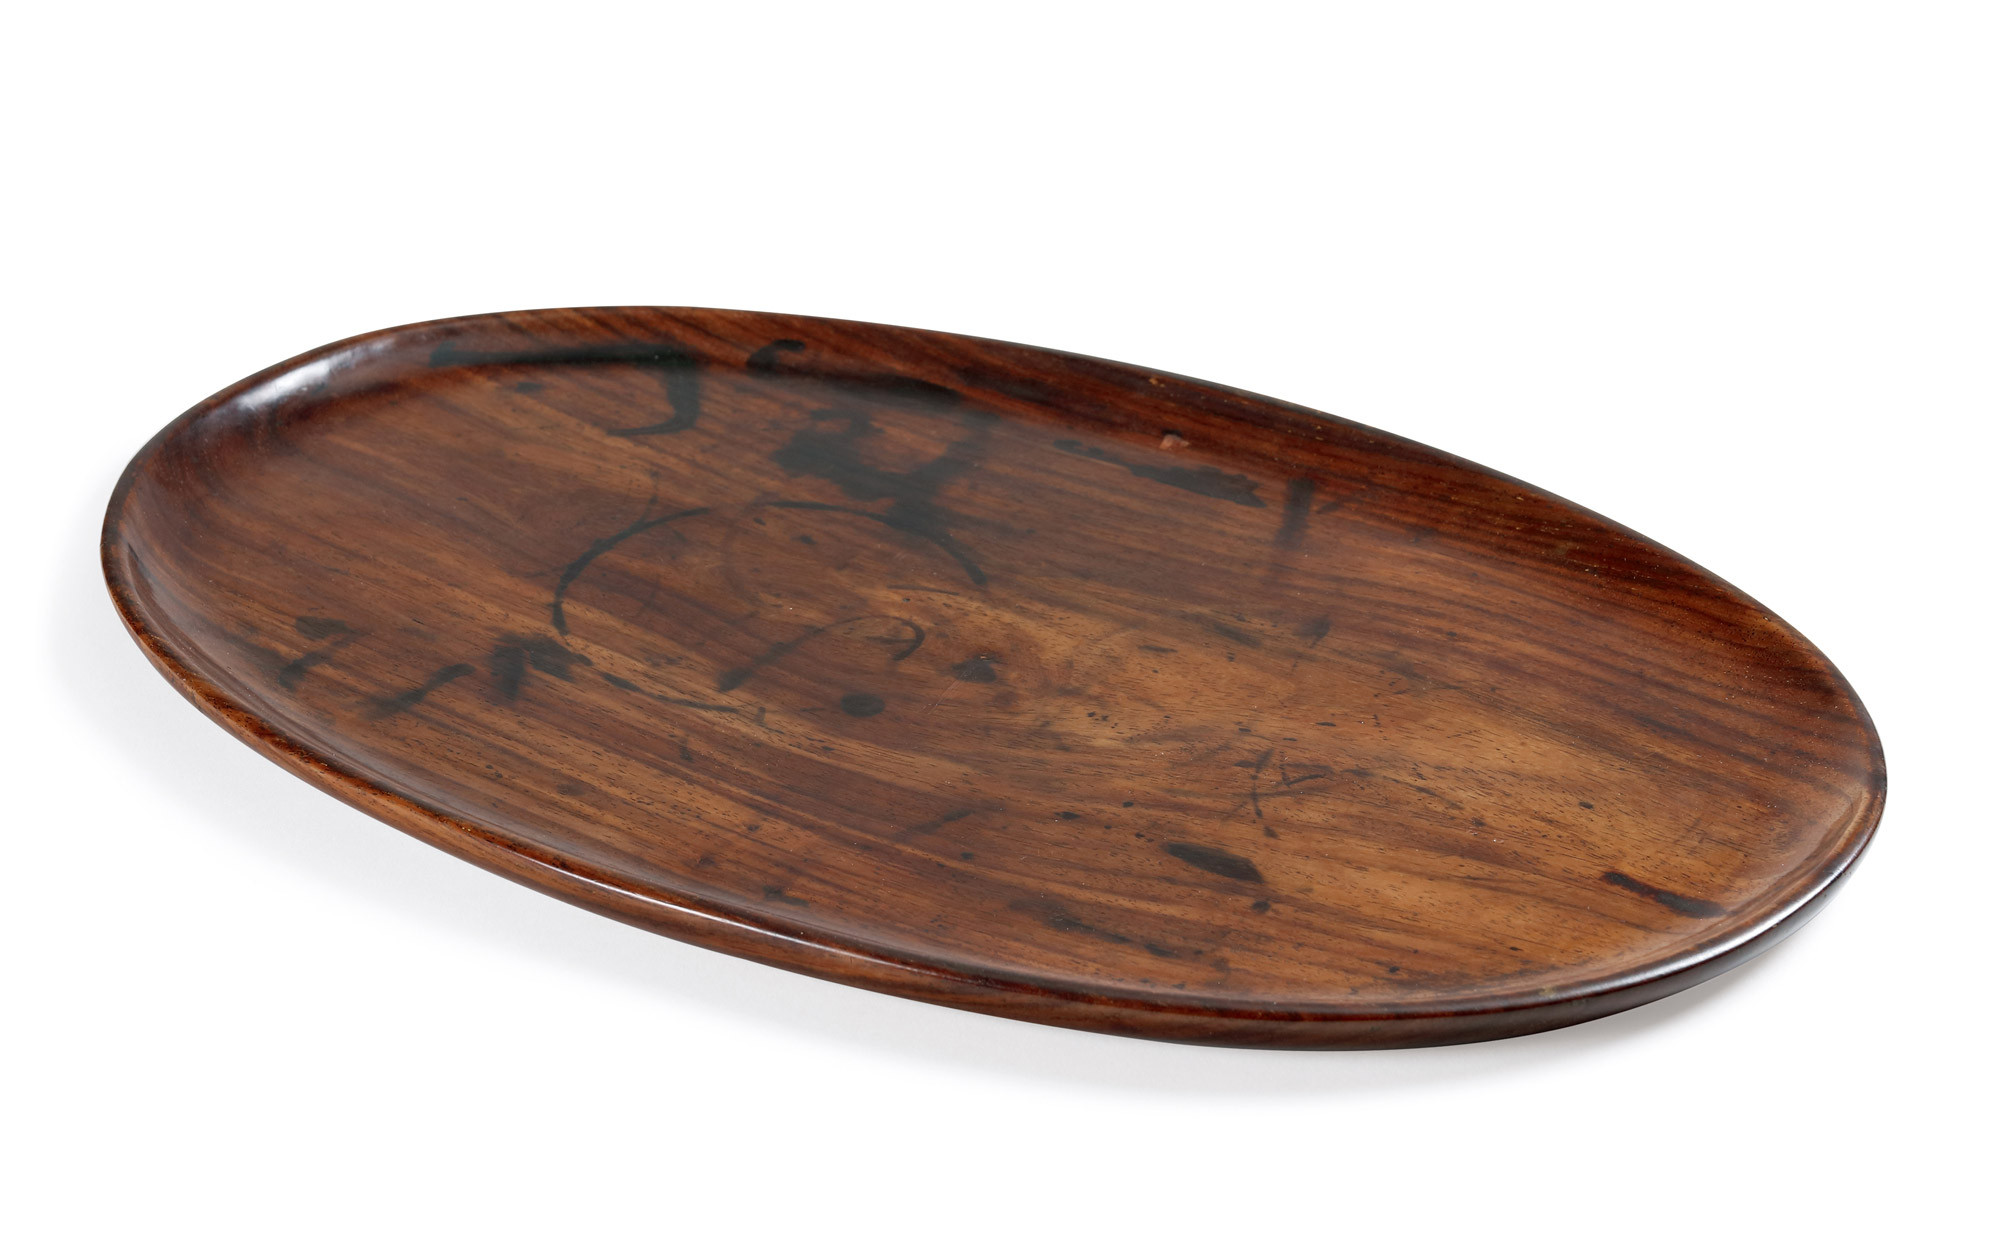 An Oval-Shaped Rosewood Tray